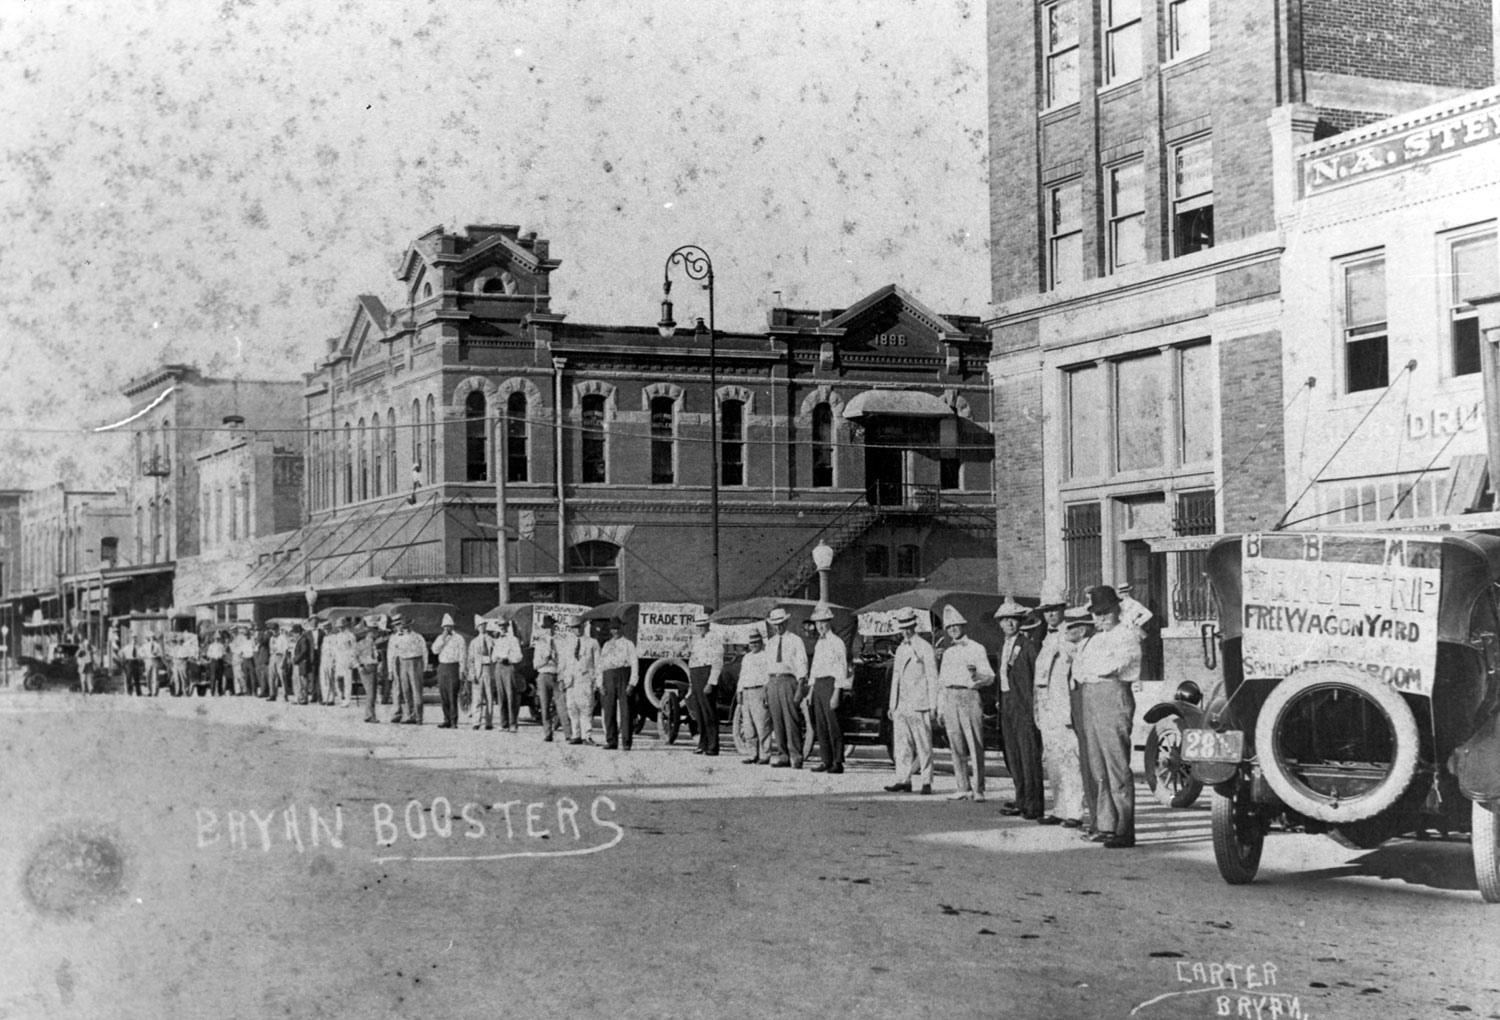 Bryan Boosters -- merchants line up for a "Trade Trip" to the Brazos County river bottom in the late 1920s or early 1930s. Merchants carried wares and distributed handbills and promotional items on such trips.